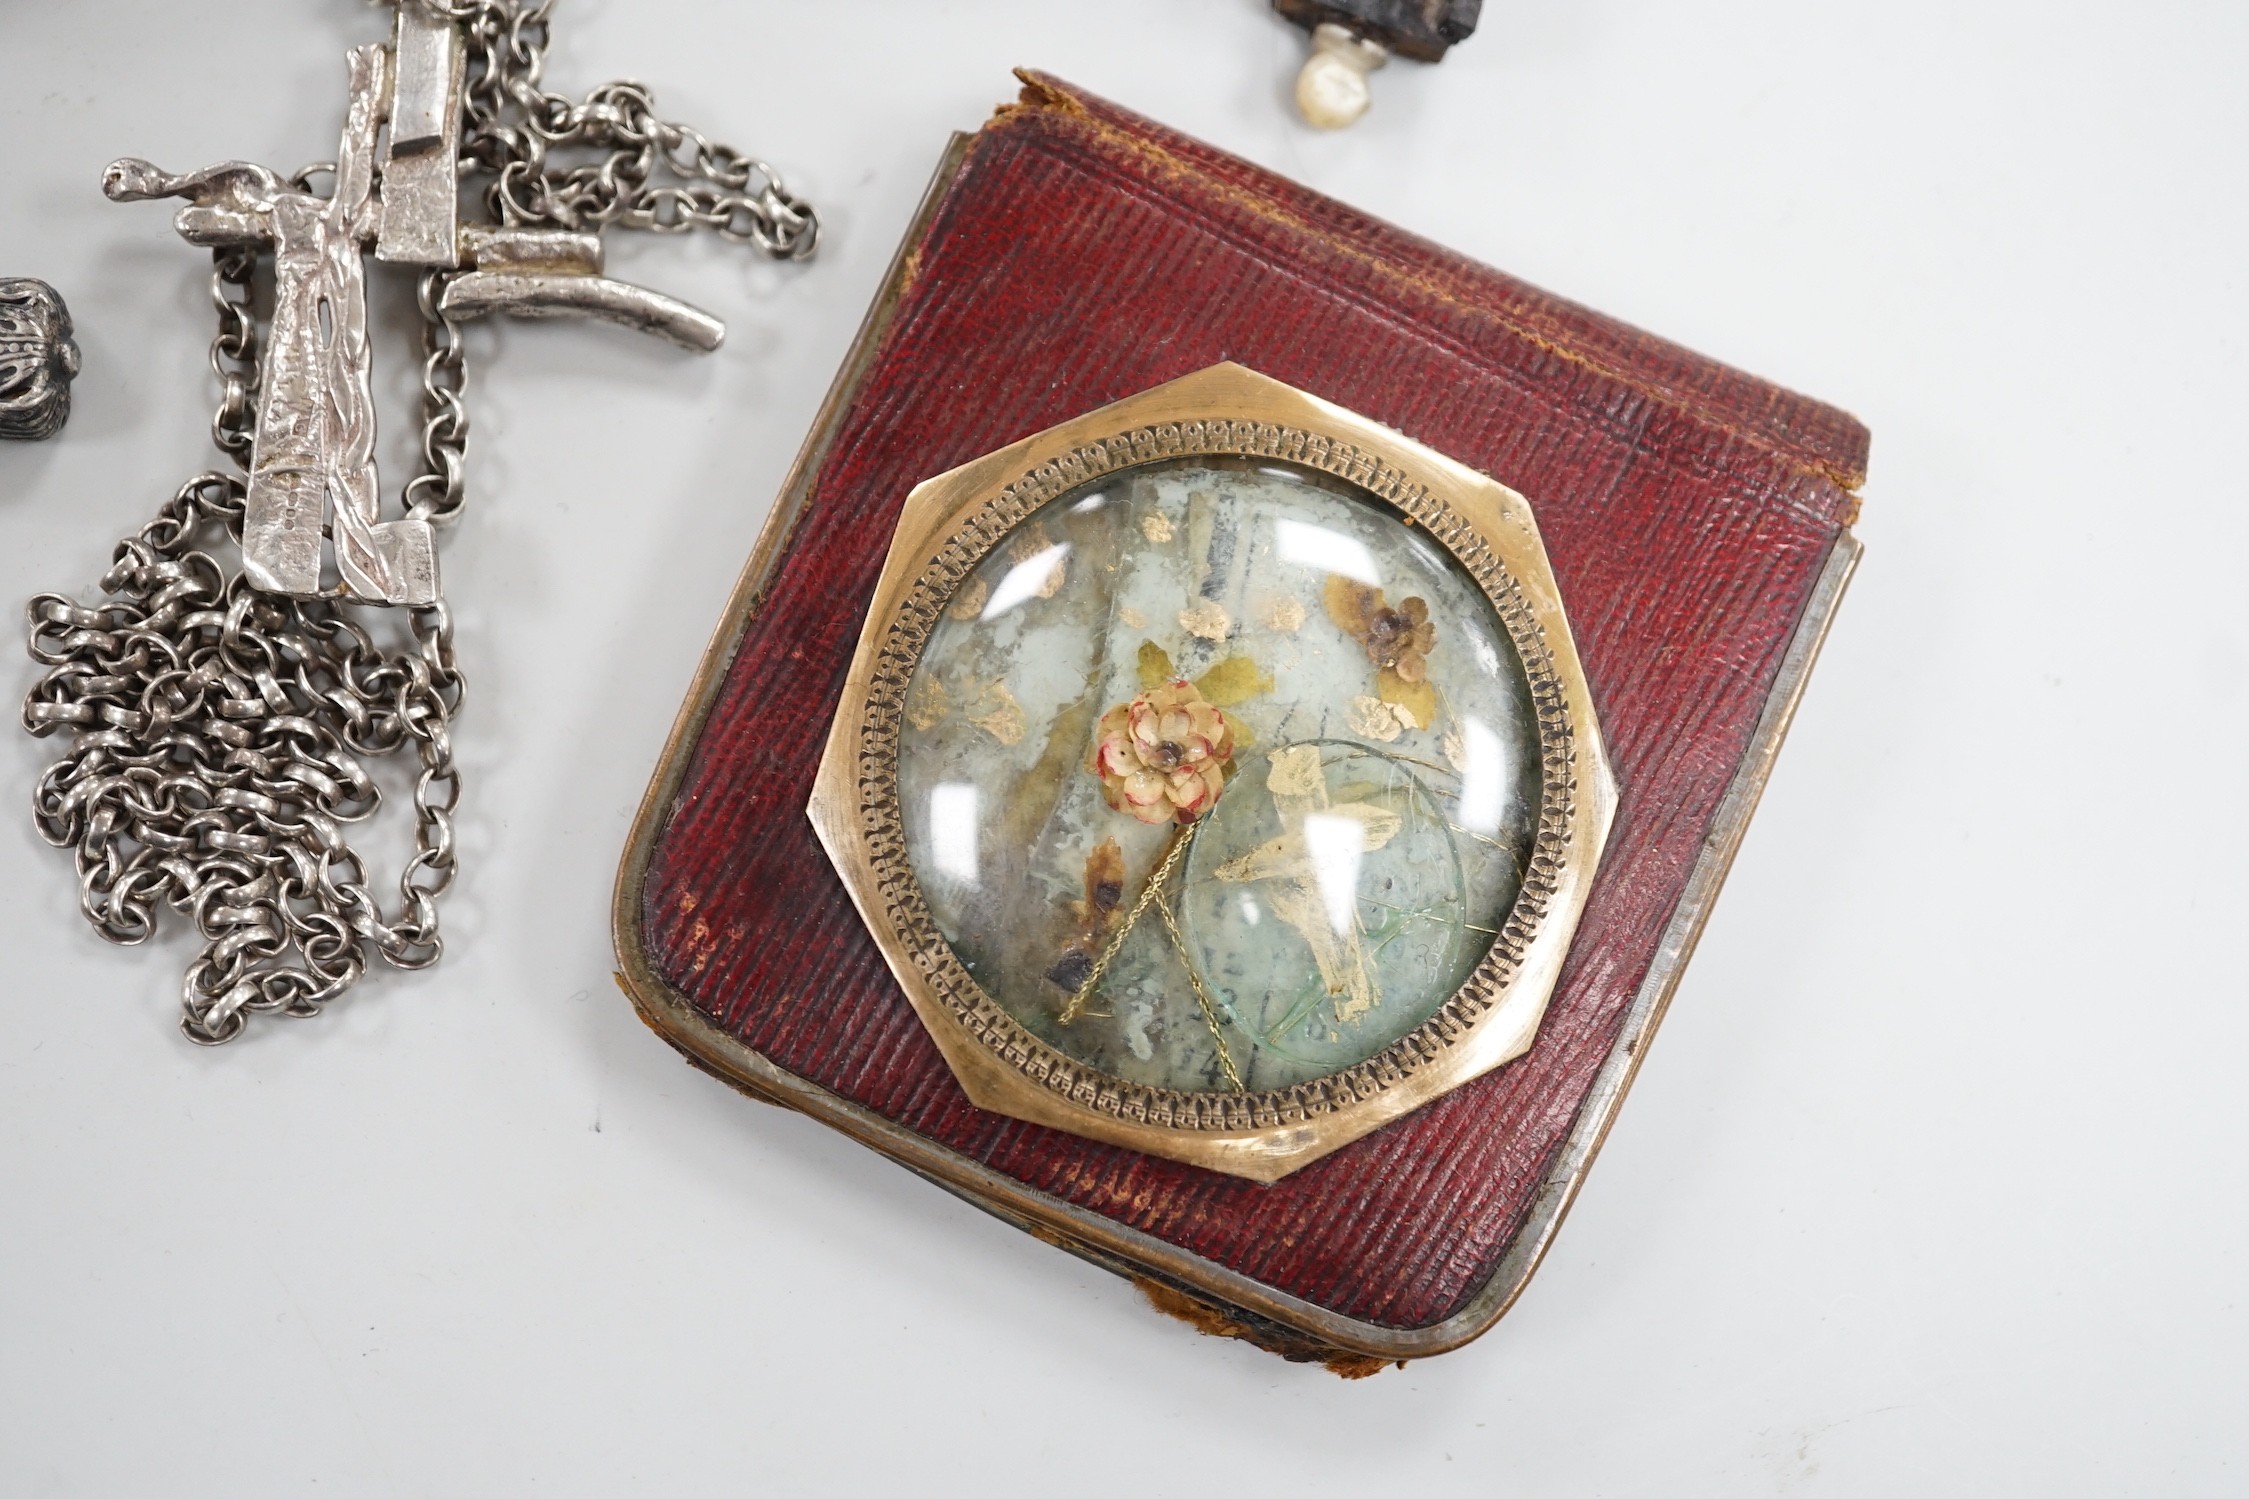 A group of catholic related collectables including Corpus Christi, rosary bead holders etc.